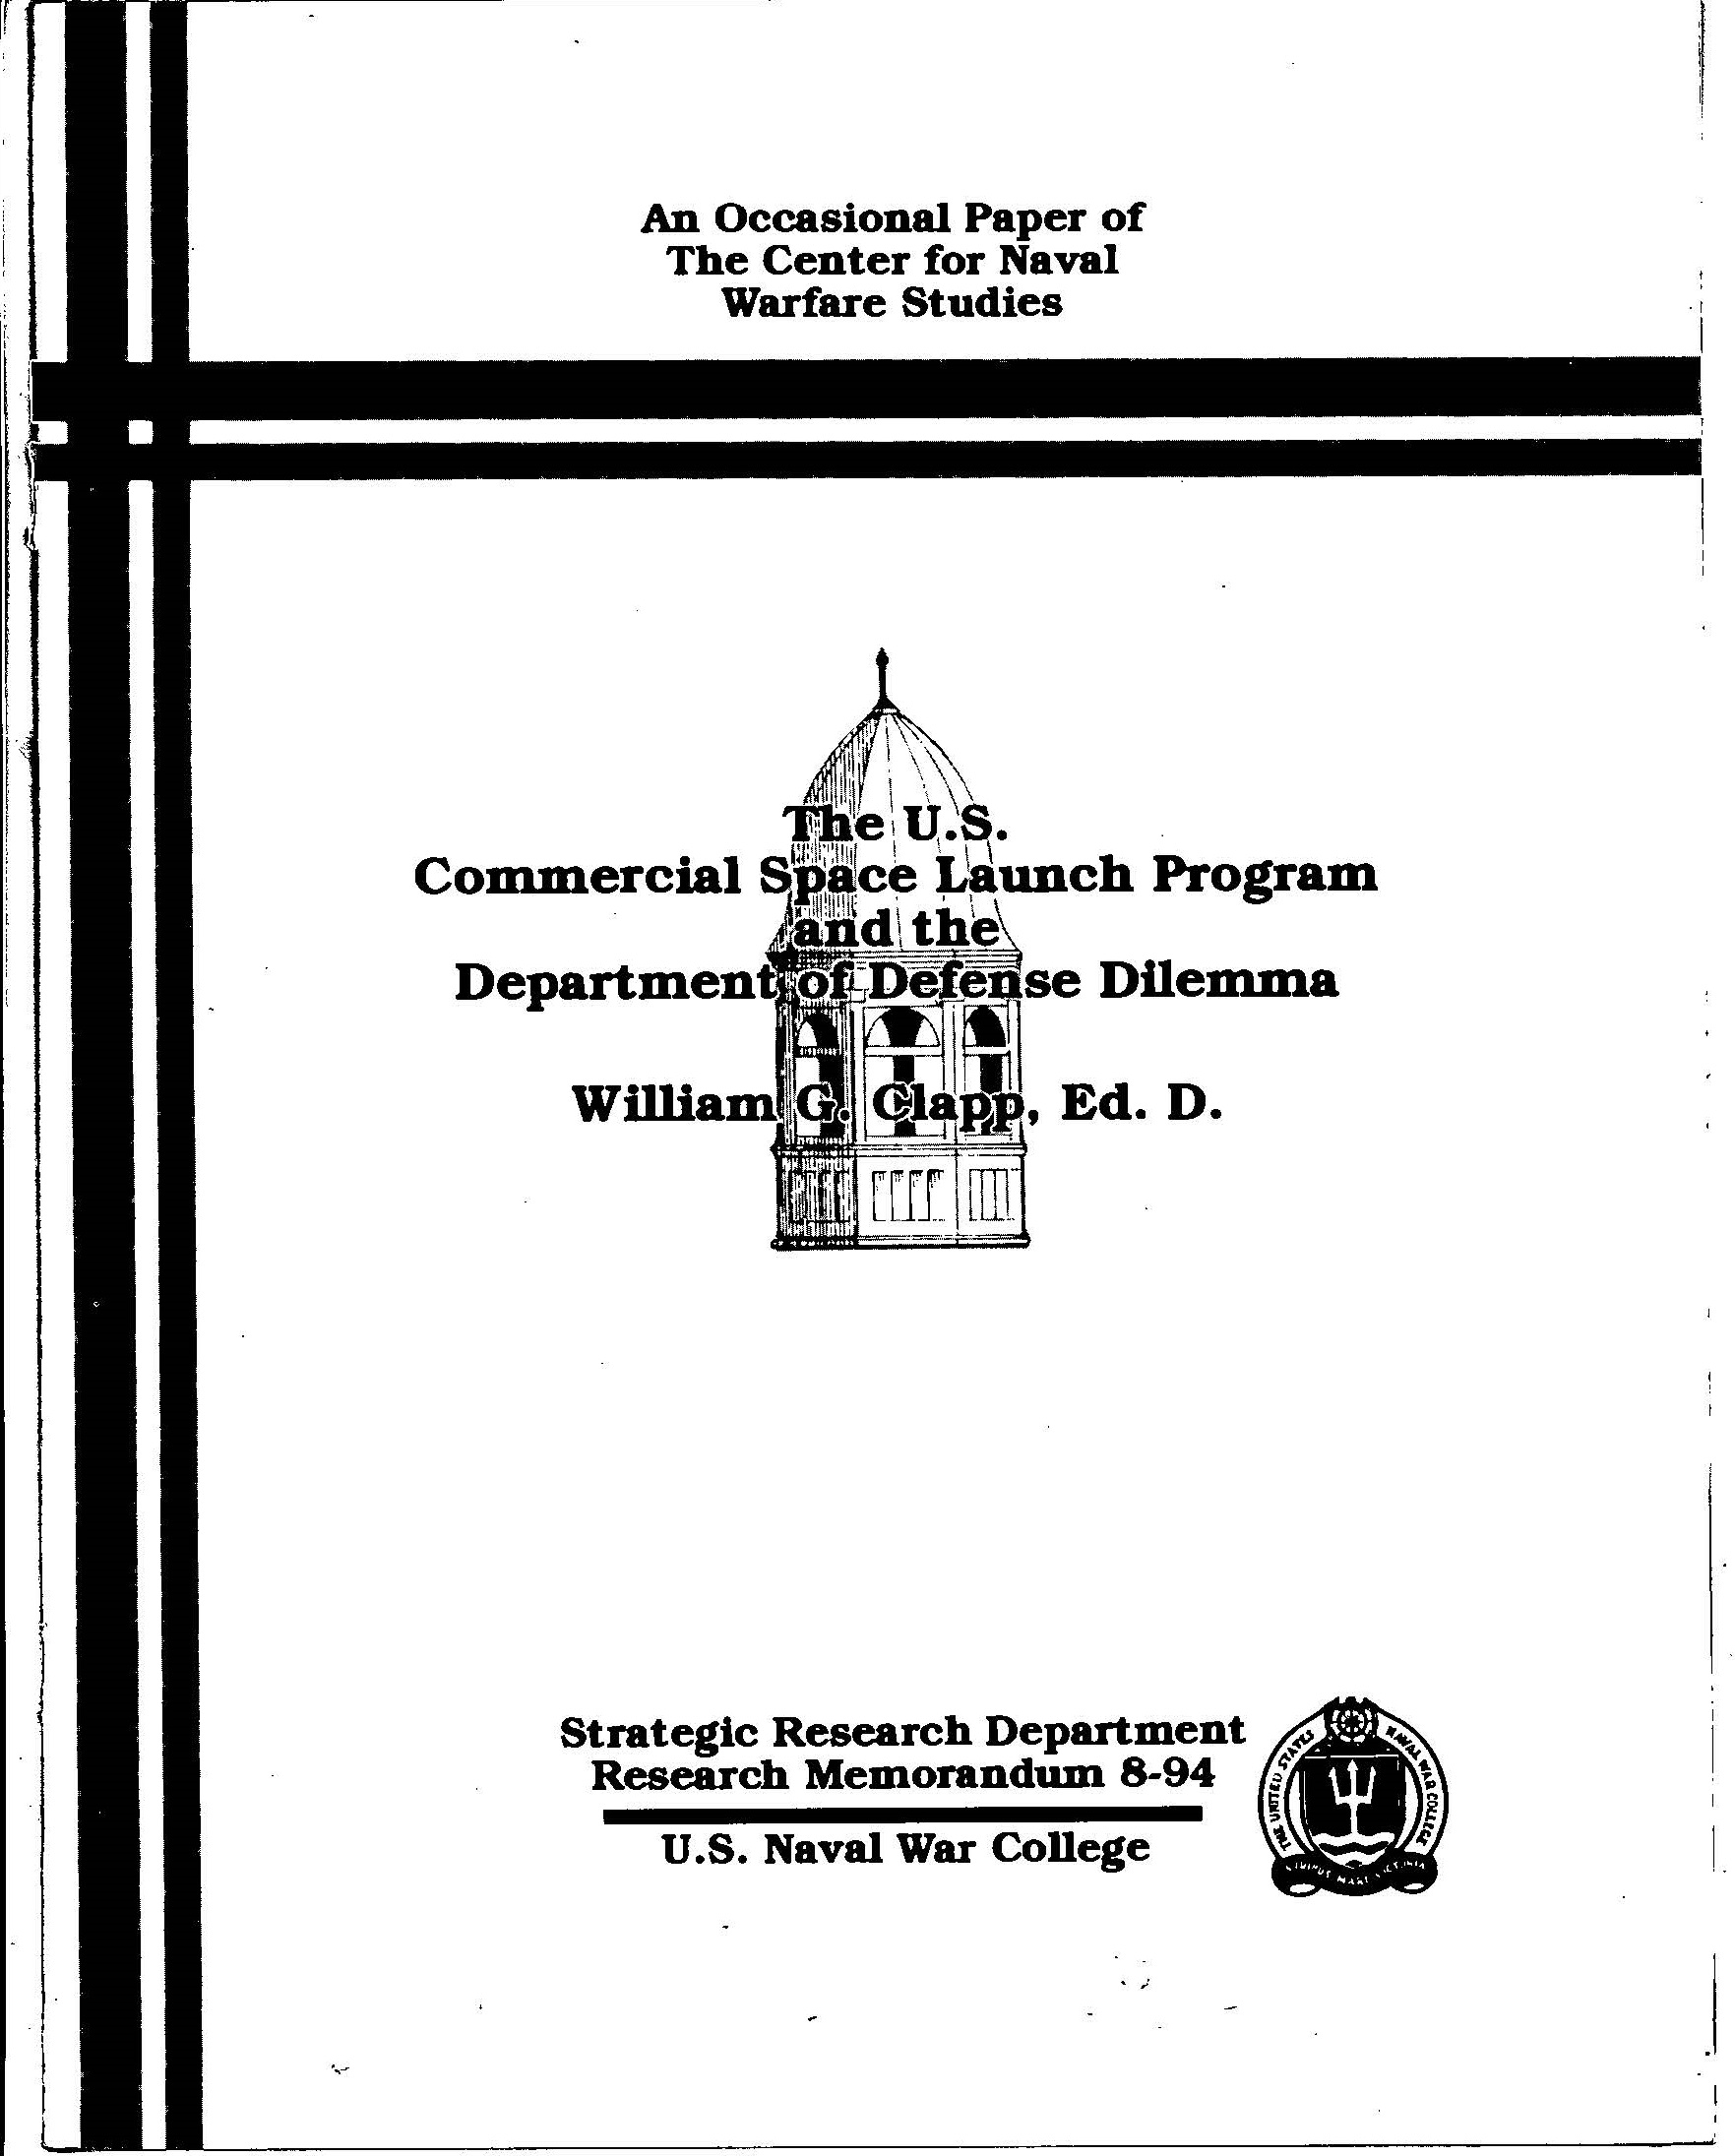 U.S. Commercial Space Launch Program and the Department of Defense Dilemma, by William G. Clapp